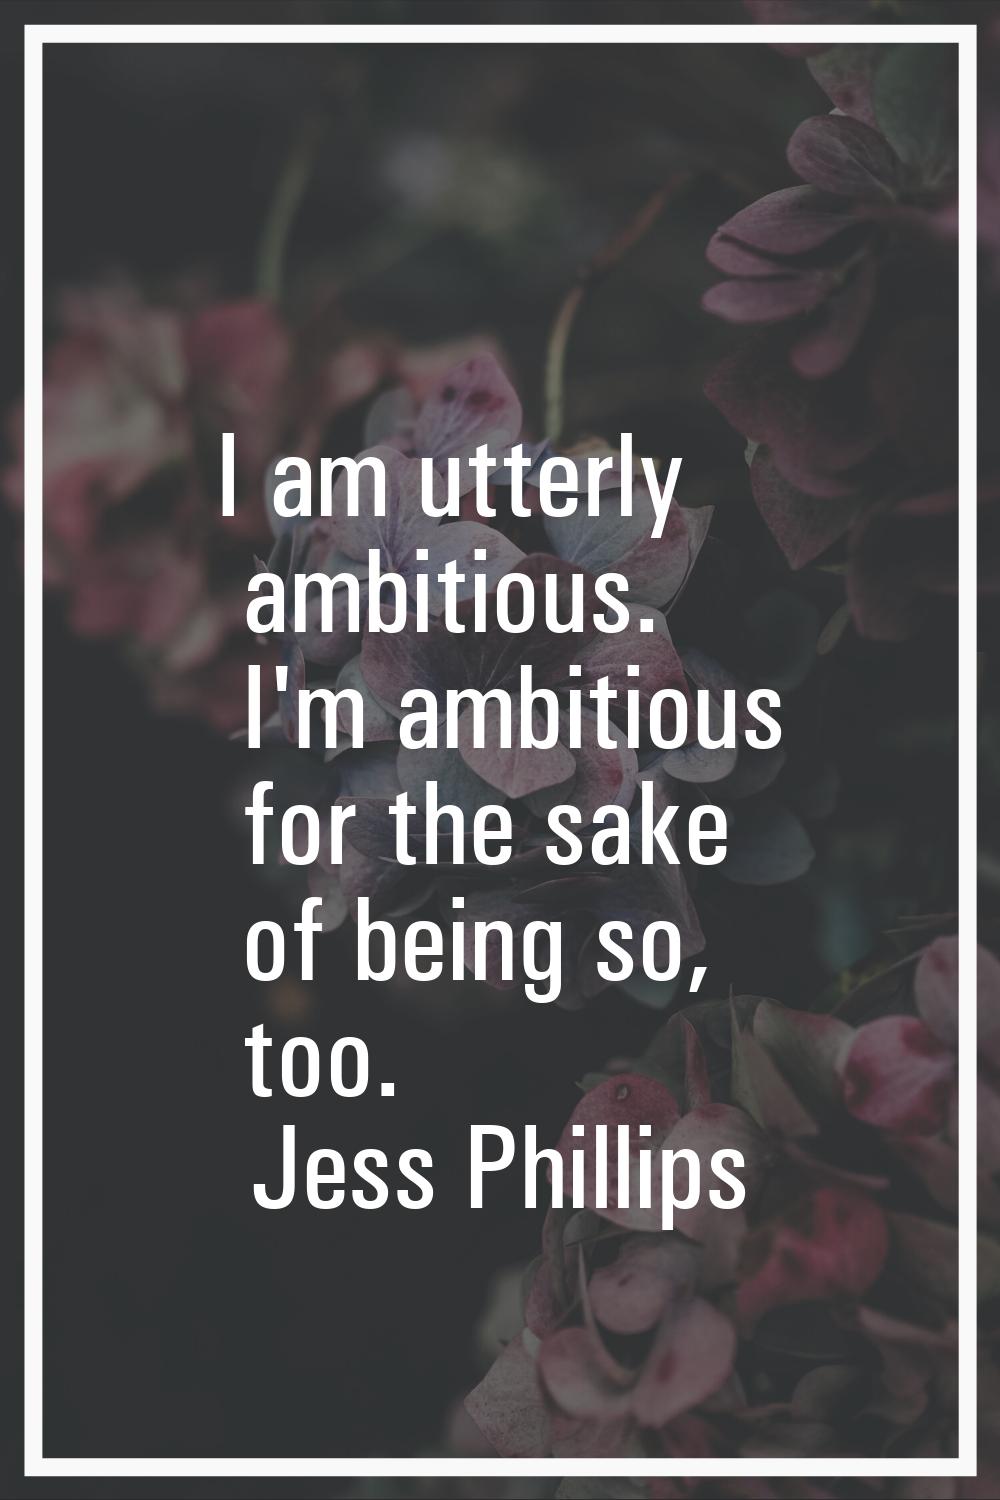 I am utterly ambitious. I'm ambitious for the sake of being so, too.